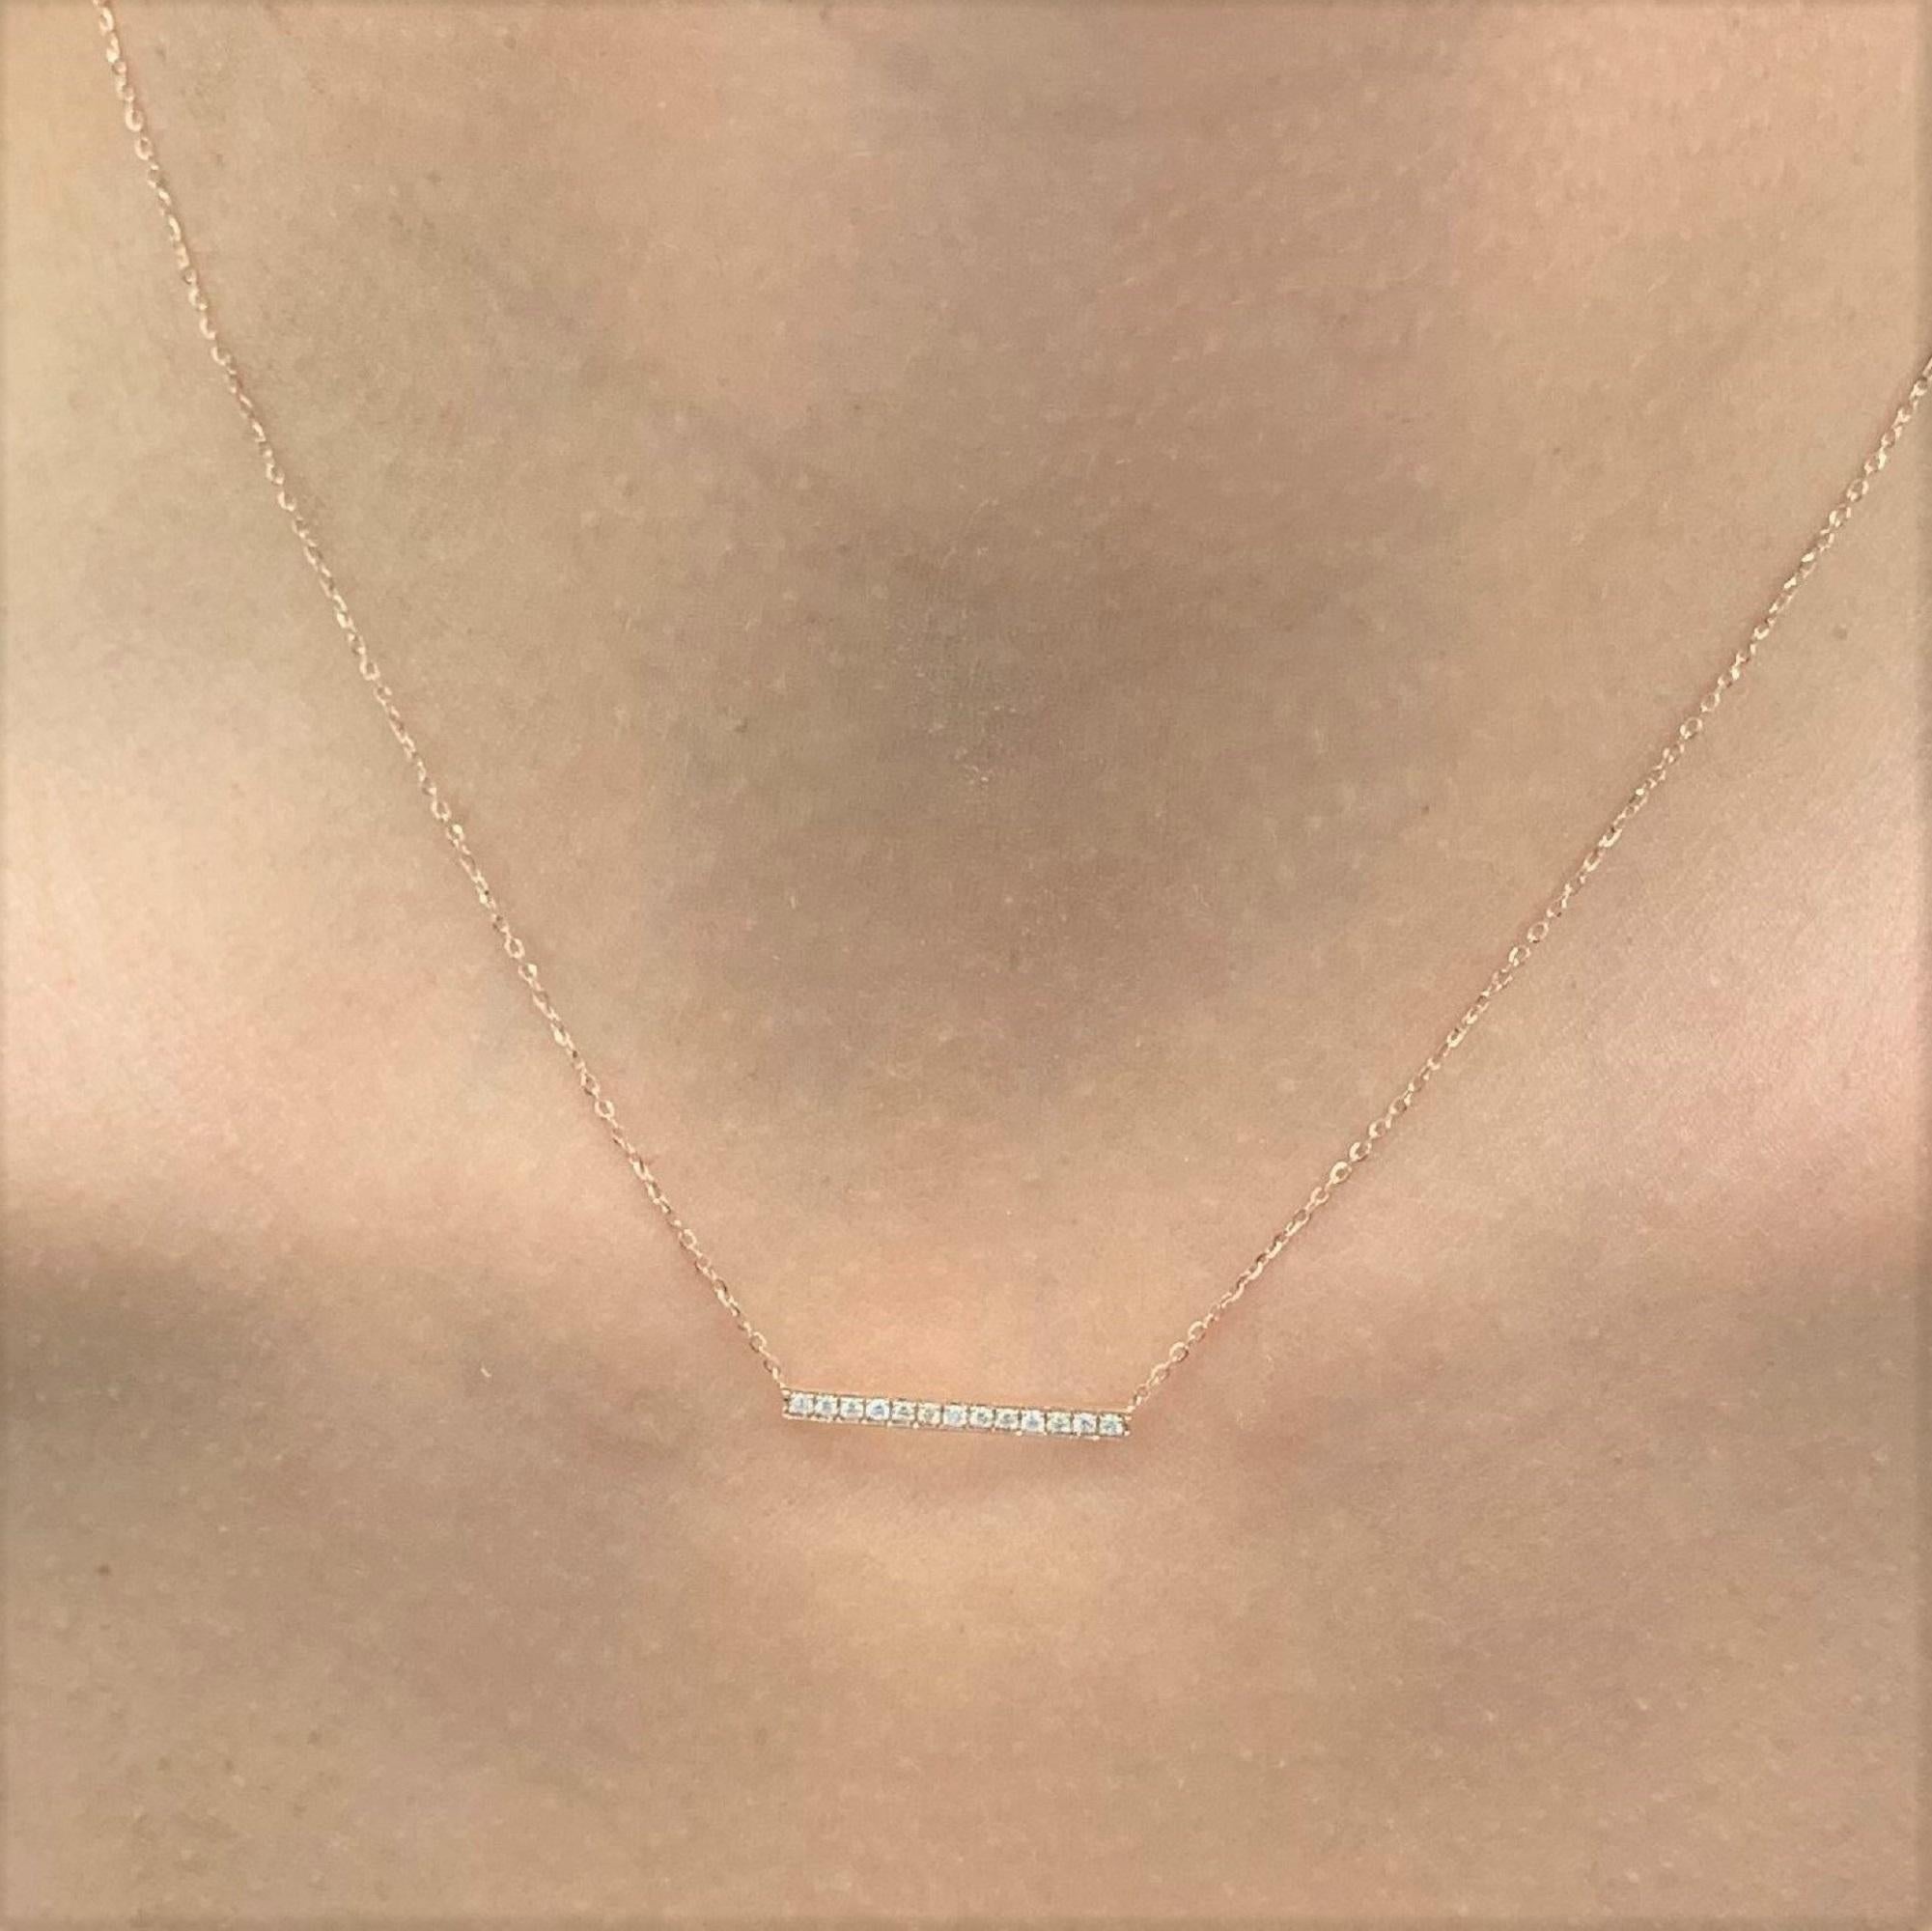 A beautiful and classic 14k Gold Diamond Bar Necklace featuring 0.10 ct. of round sparkling natural Diamonds. Diamond Color and Clarity is GH SI1-SI2. Chain measures 18